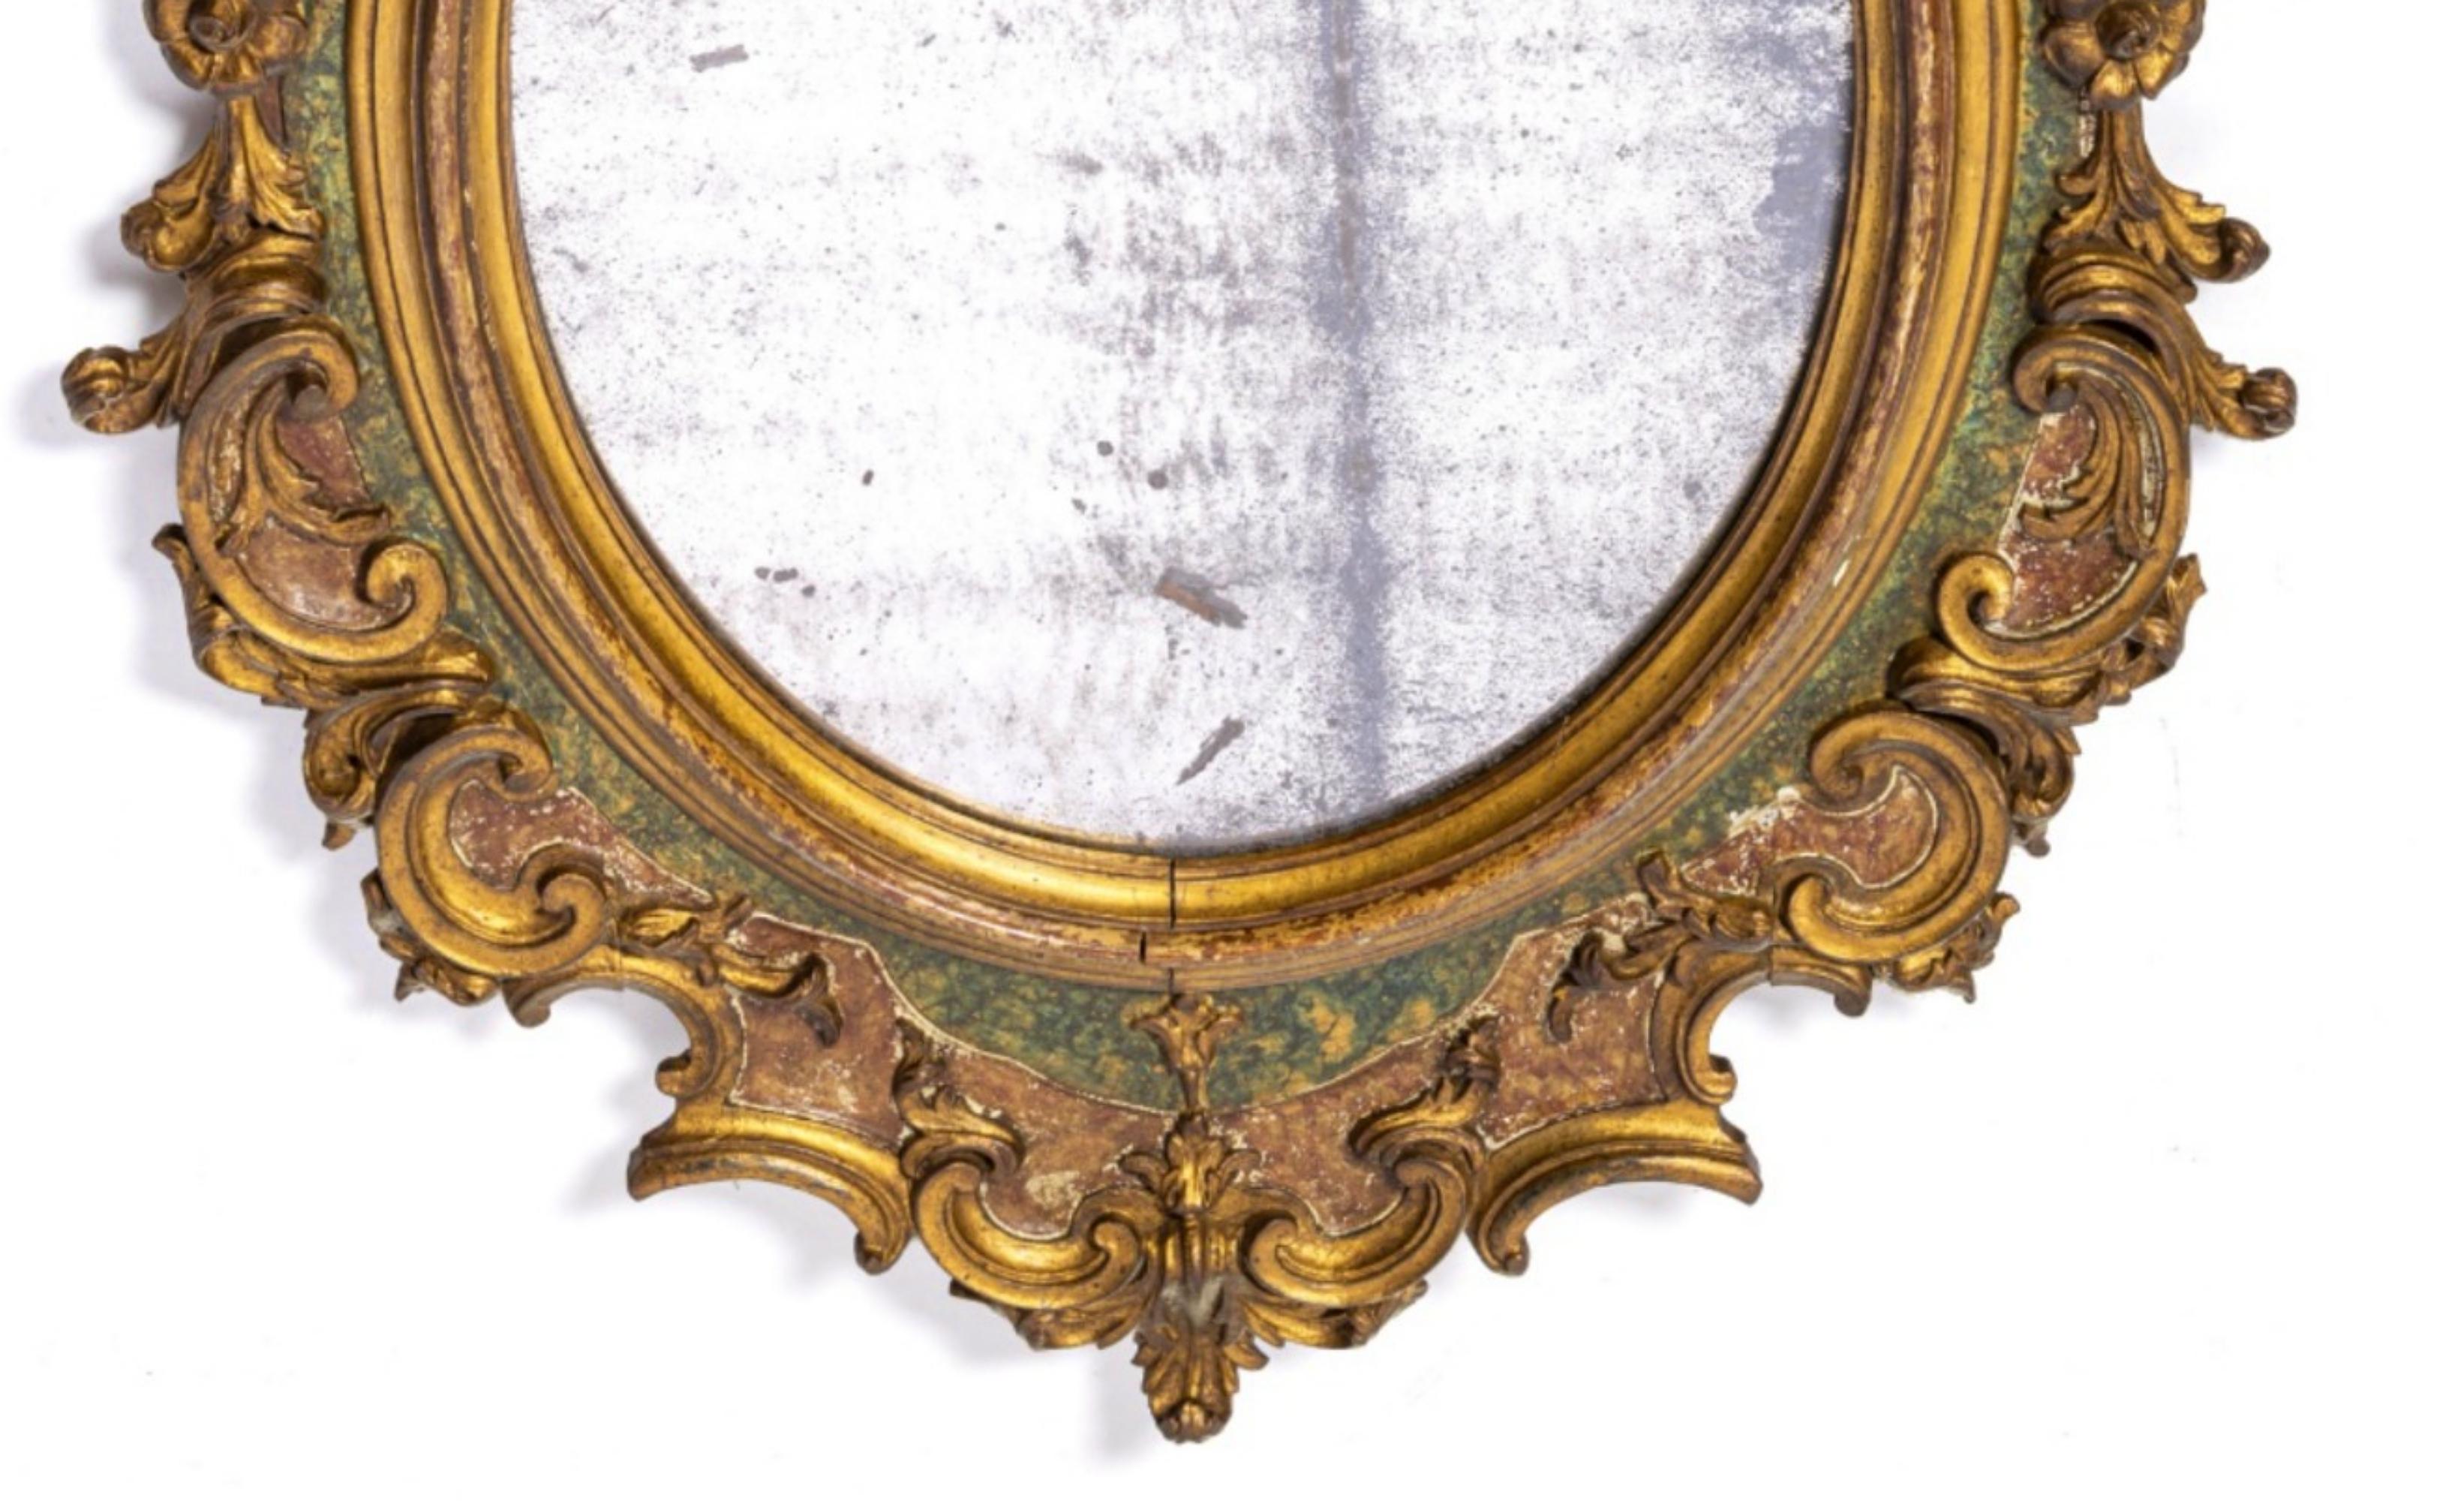 French Mirror
19th century
with carved, painted and gilded wooden frame.
DIM.: 99 x 74 cm
good conditions.